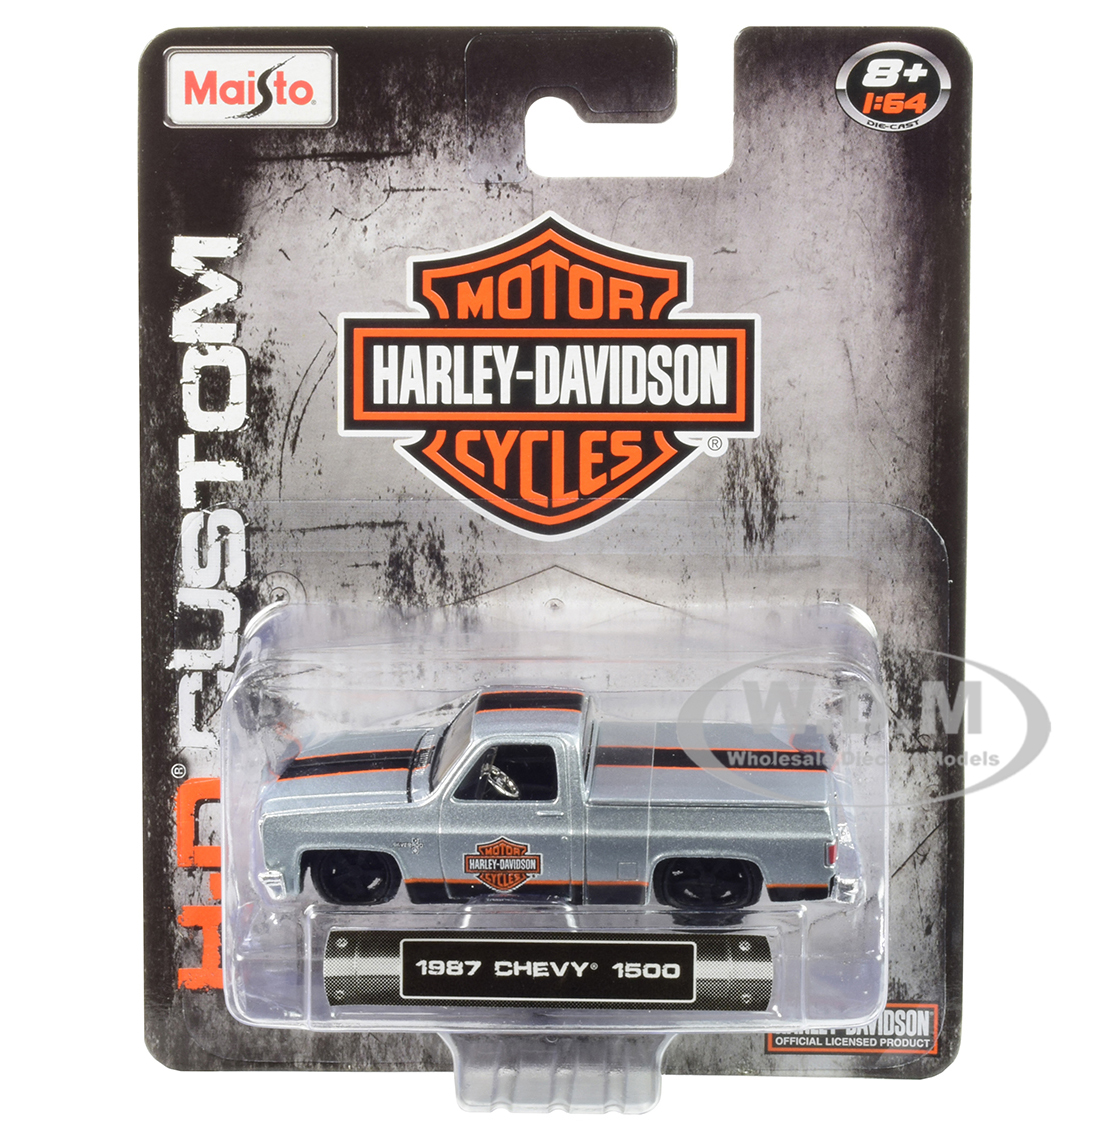 1987 Chevrolet Silverado 1500 Pickup Truck With Bed Cover Silver With Black And Orange Stripes "harley-davidson" "h-d Custom" 1/64 Diecast Model Car